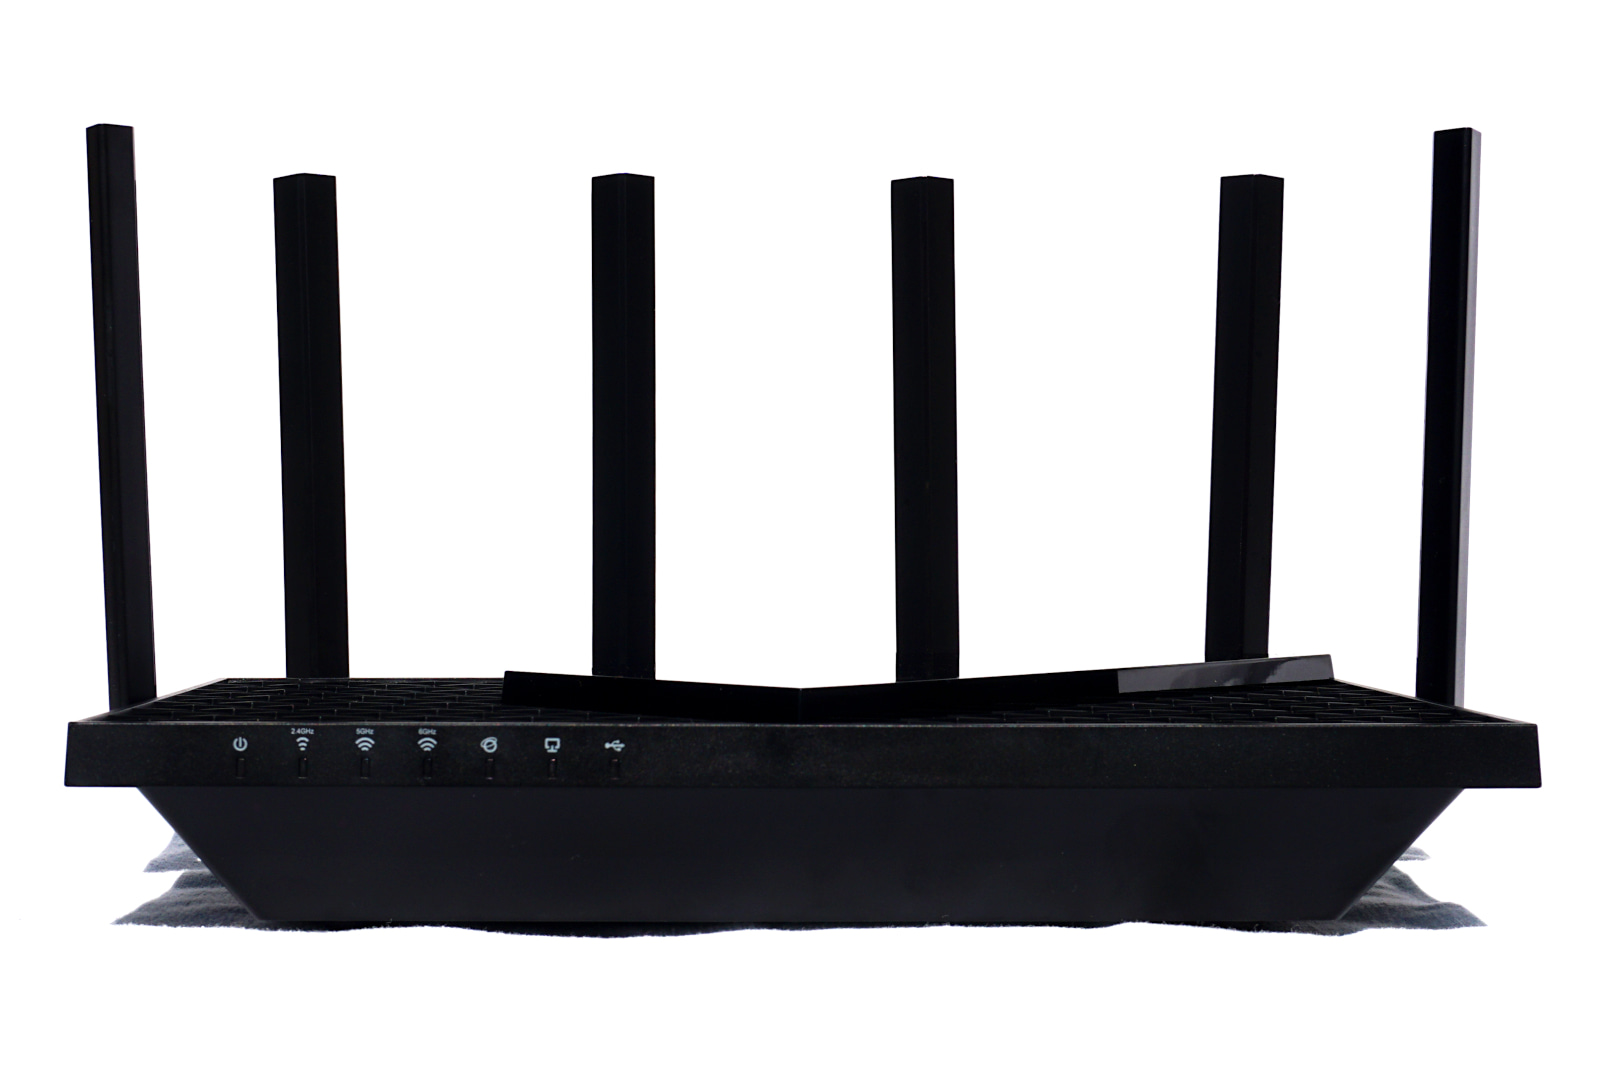 Upgrade to WiFi 6E with the TP-Link Archer AXE75 Router